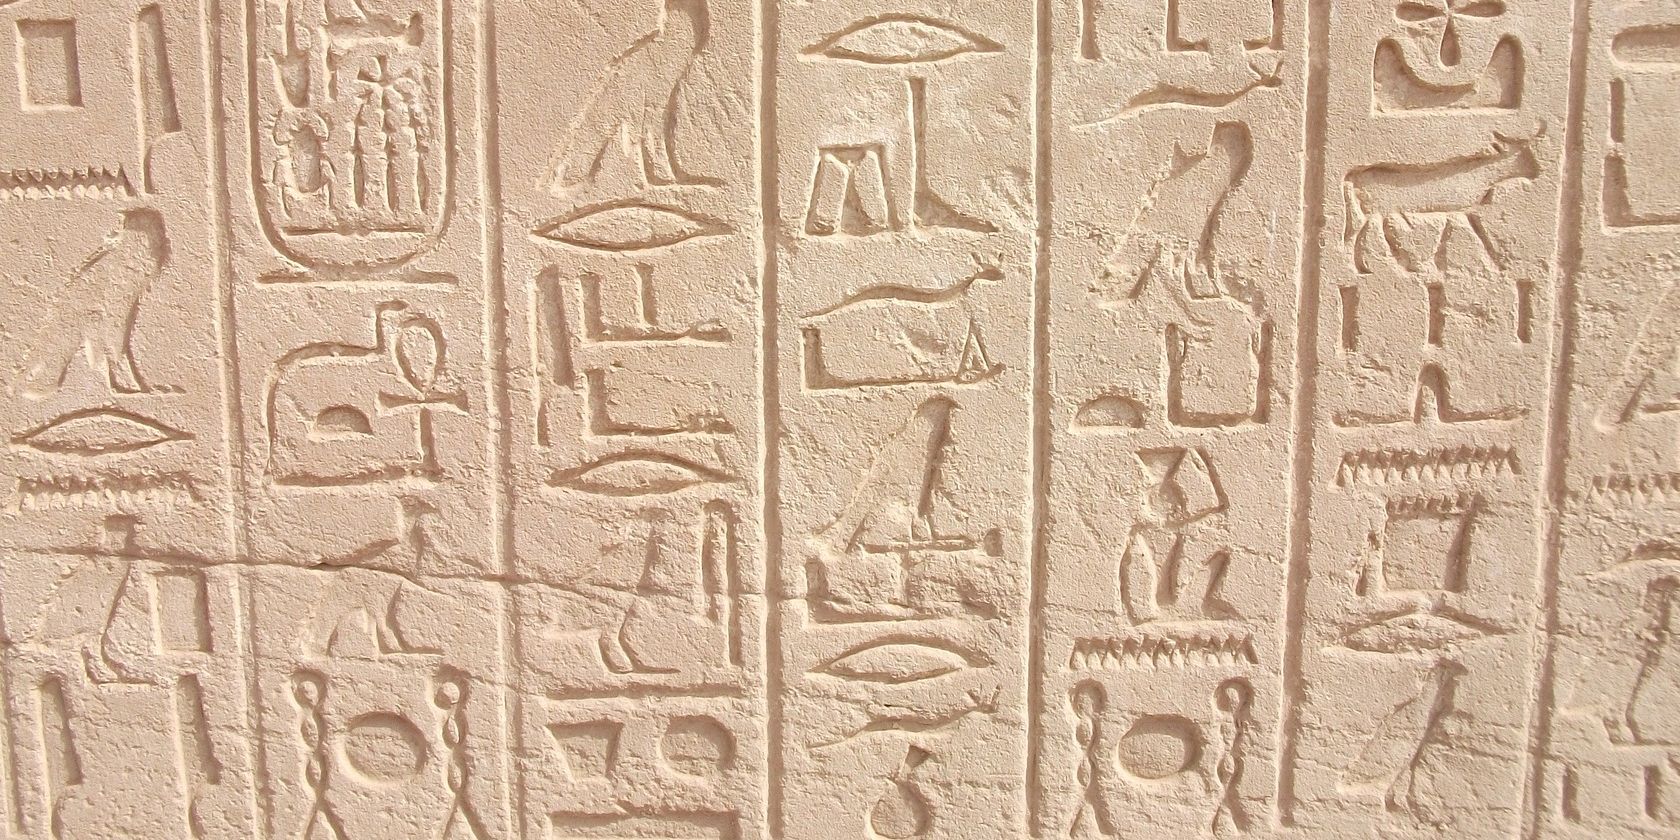 Ancient Egyptian hieroglyphs on the wall